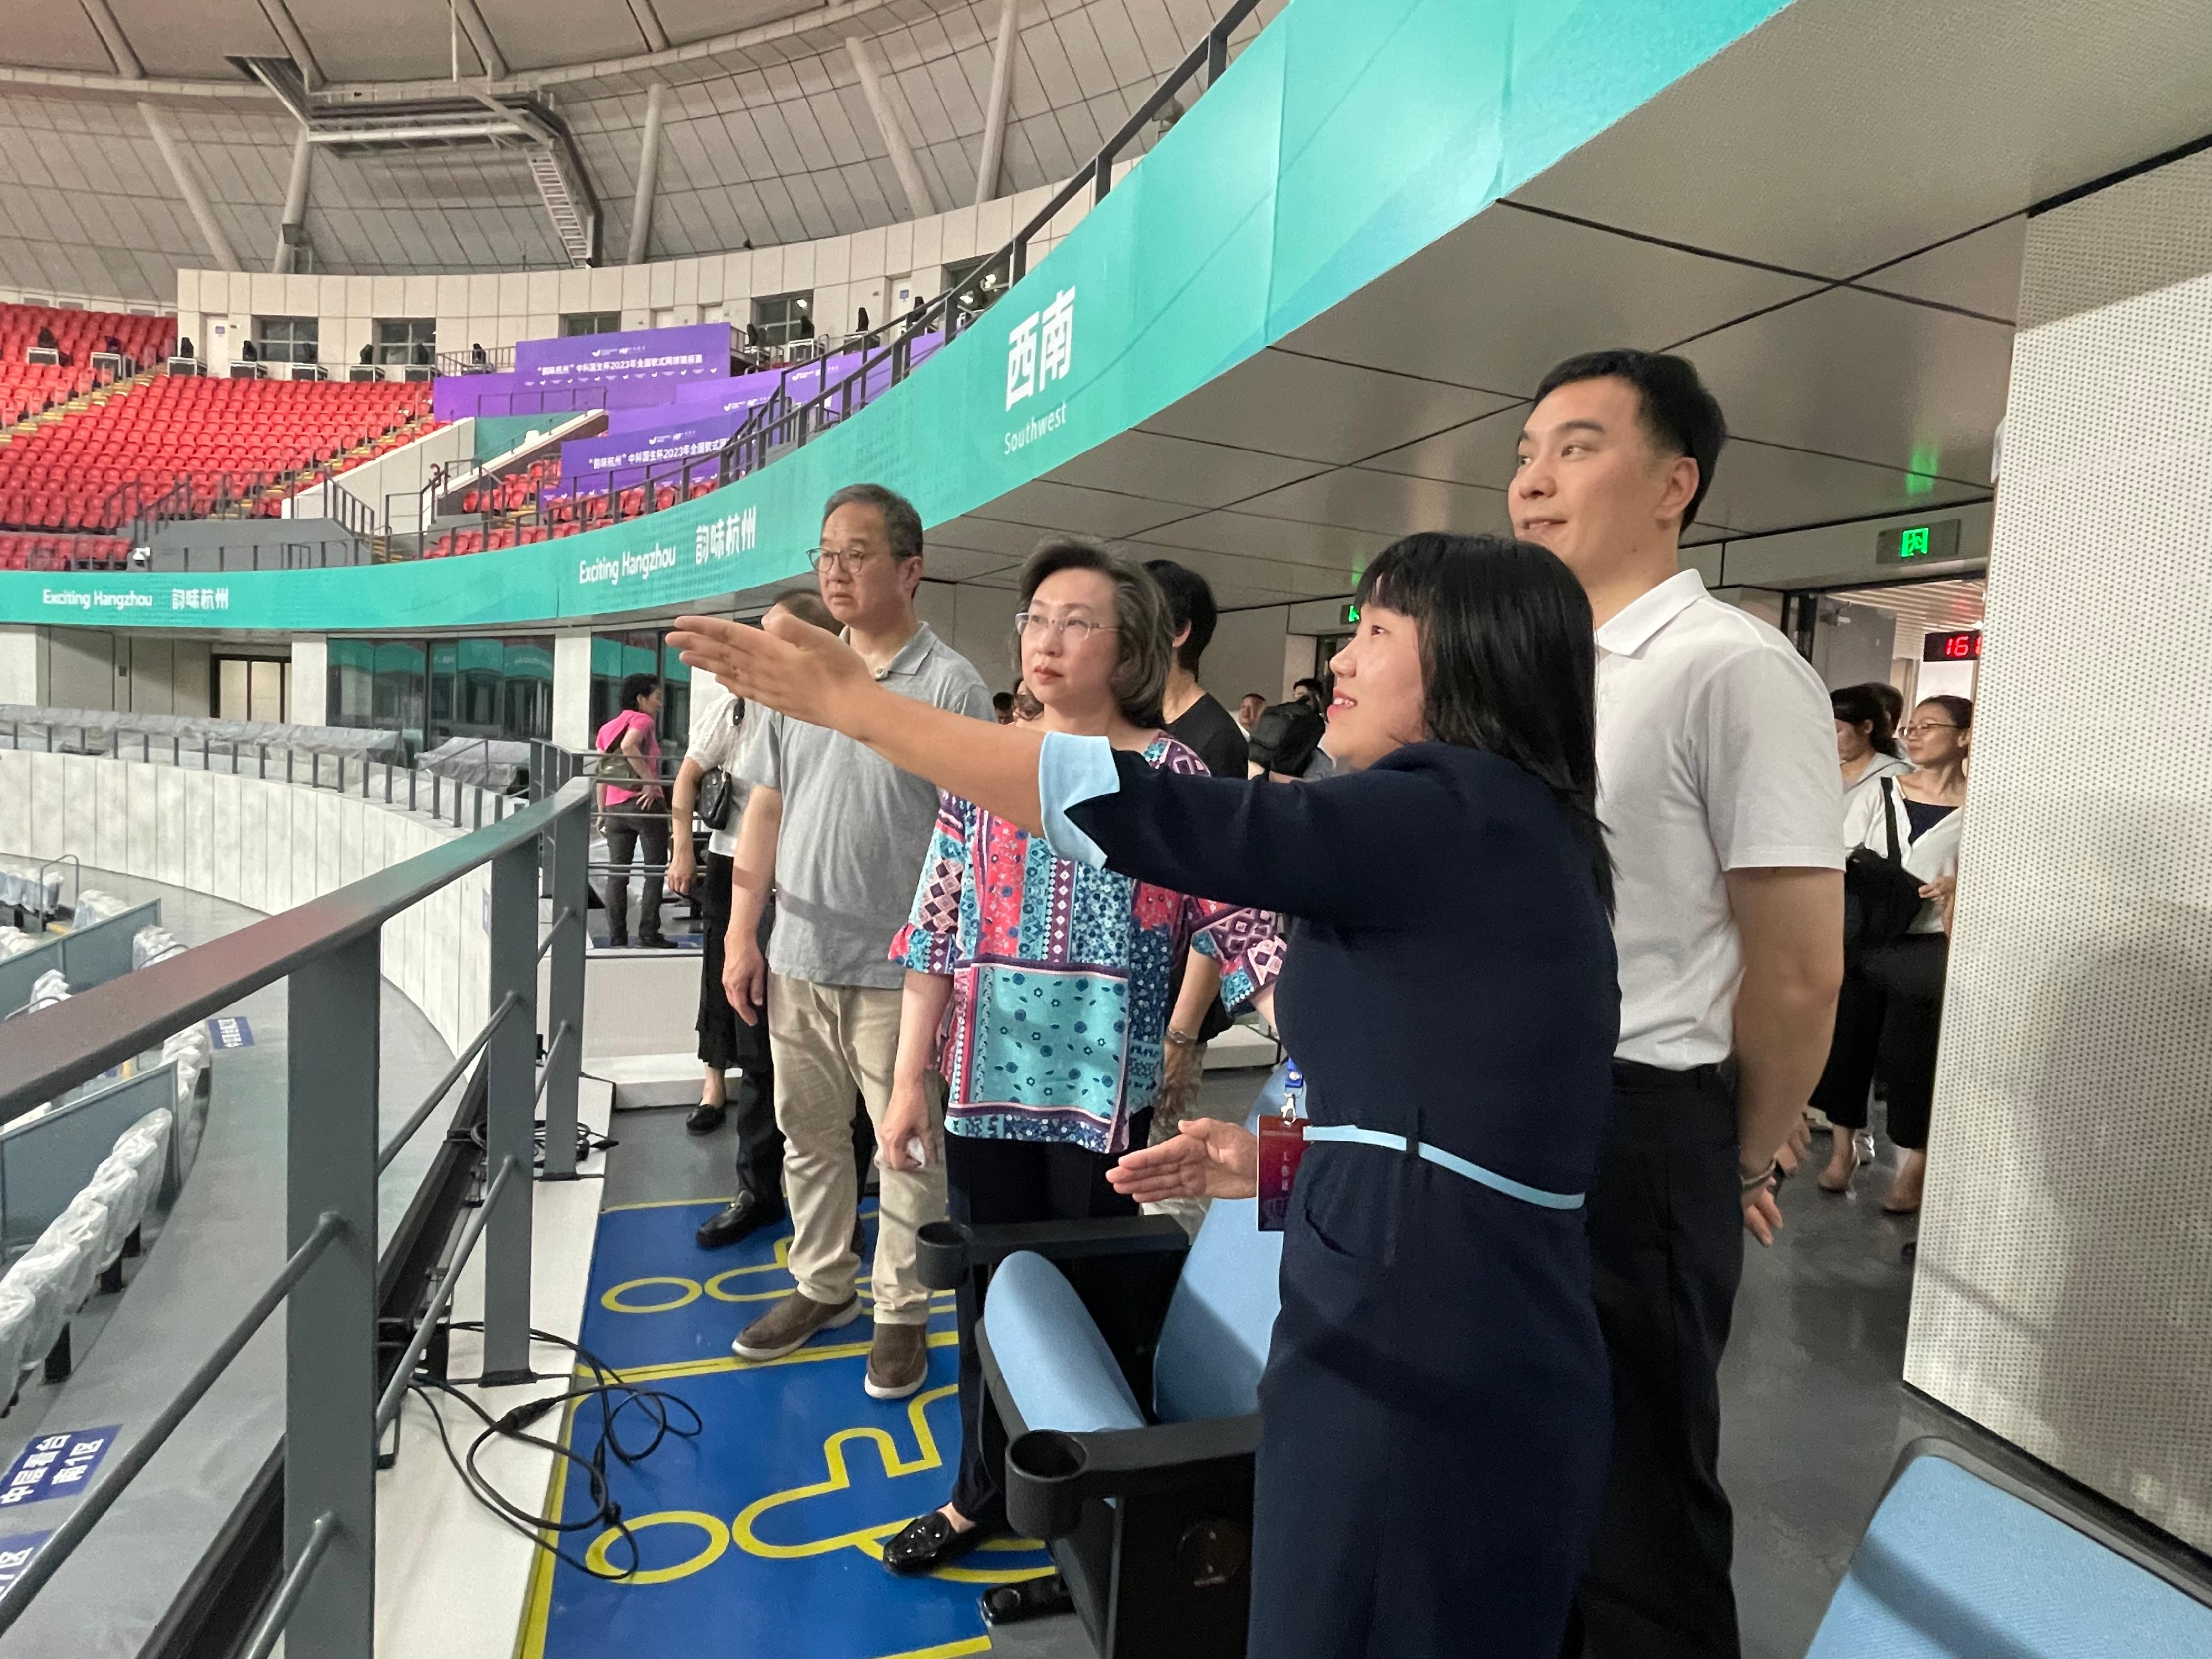 The Secretary for the Civil Service, Mrs Ingrid Yeung (second left), and Permanent Secretaries and Heads of Departments of the Hong Kong Special Administrative Region Government today (June 29) visited the Tennis Center Finals Hall in the Hangzhou Olympic Sports Center, a venue for the 19th Asian Games Hangzhou. Looking on is the Permanent Secretary for Culture, Sports and Tourism, Mr Joe Wong (first left).